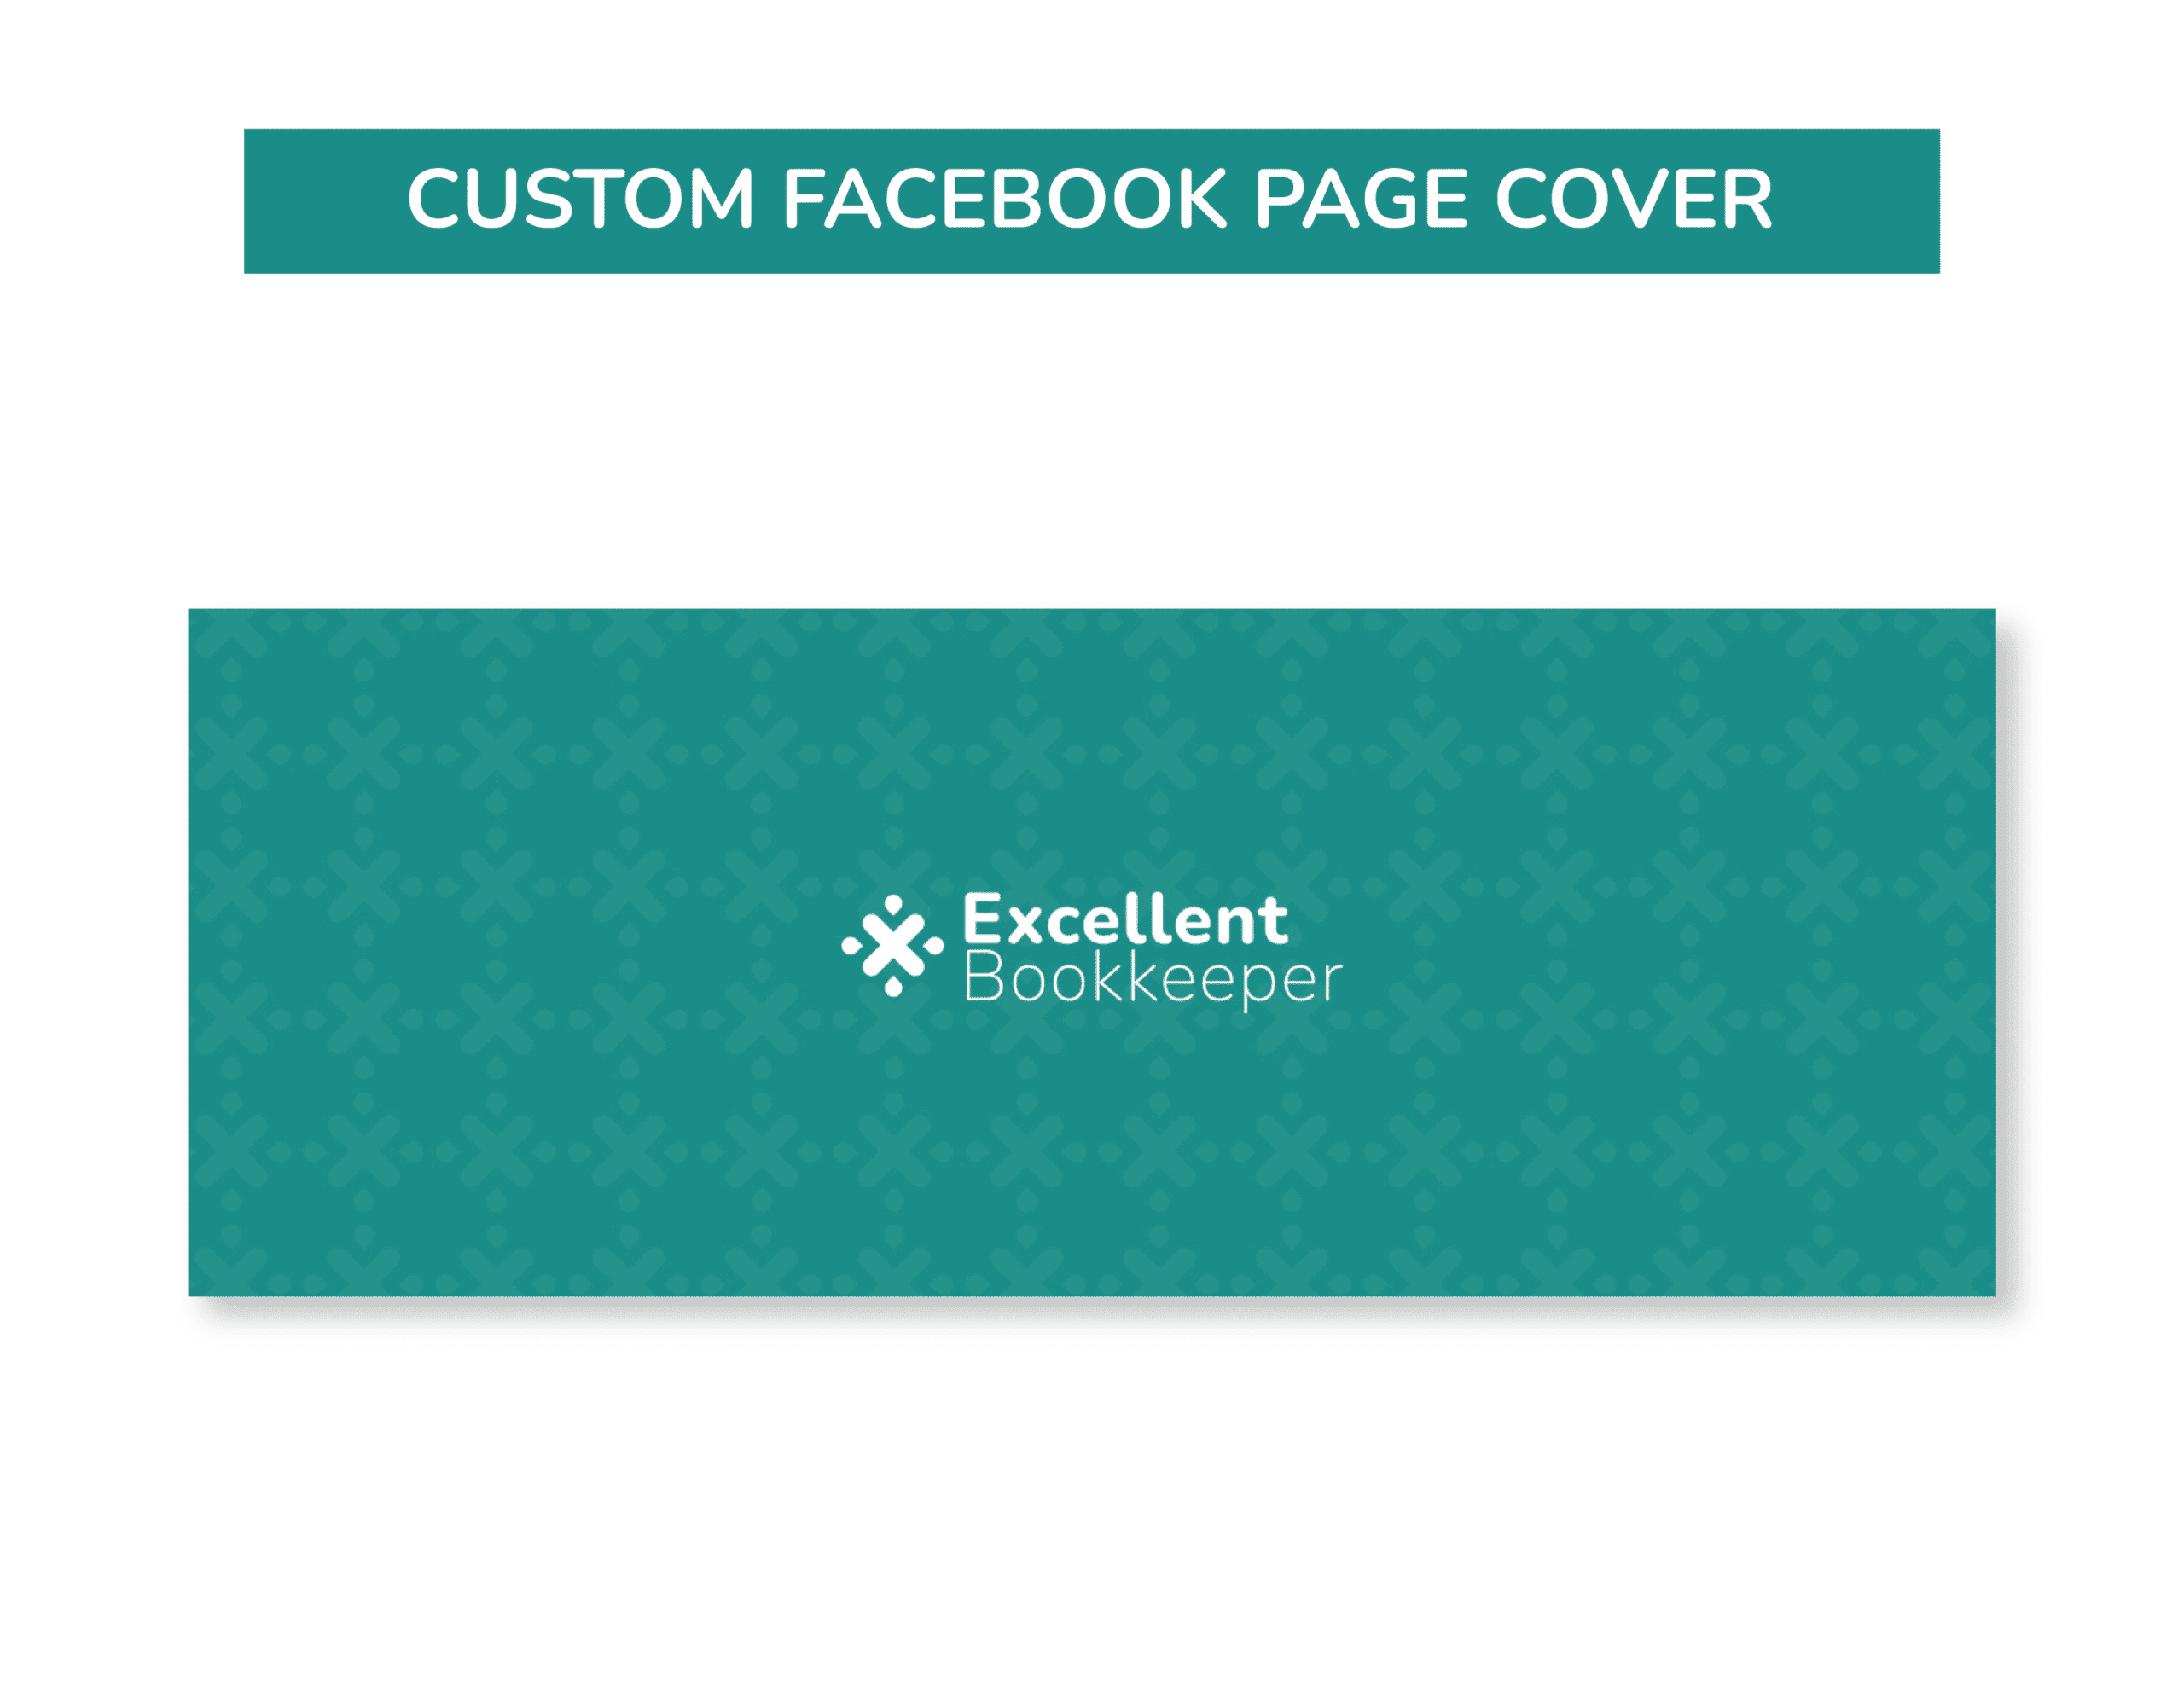 06Excellent__Custom Facebook Page Cover